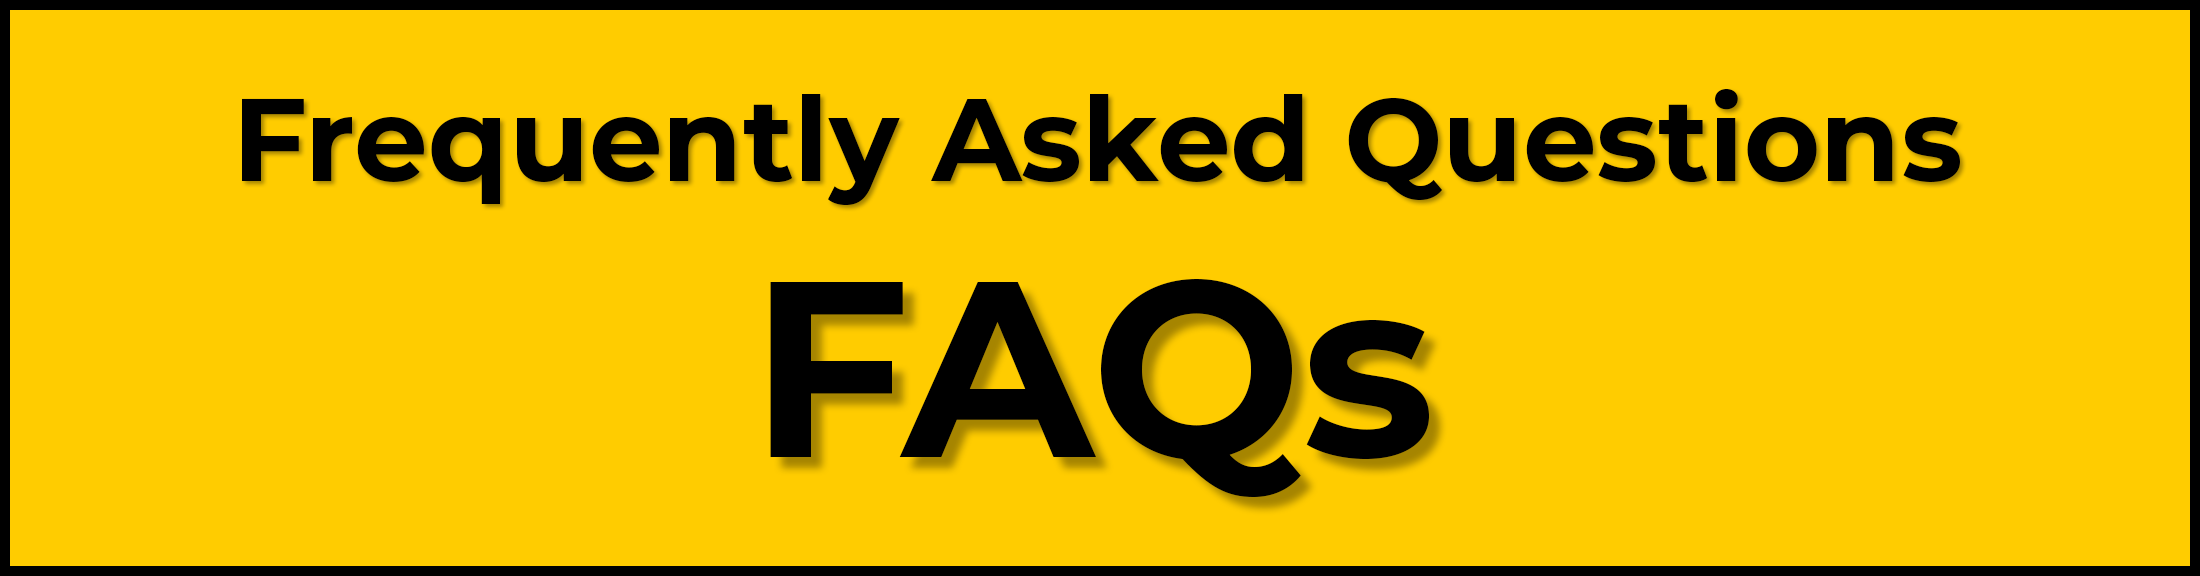 Image with "Frequently Asked Questions (FAQs)"